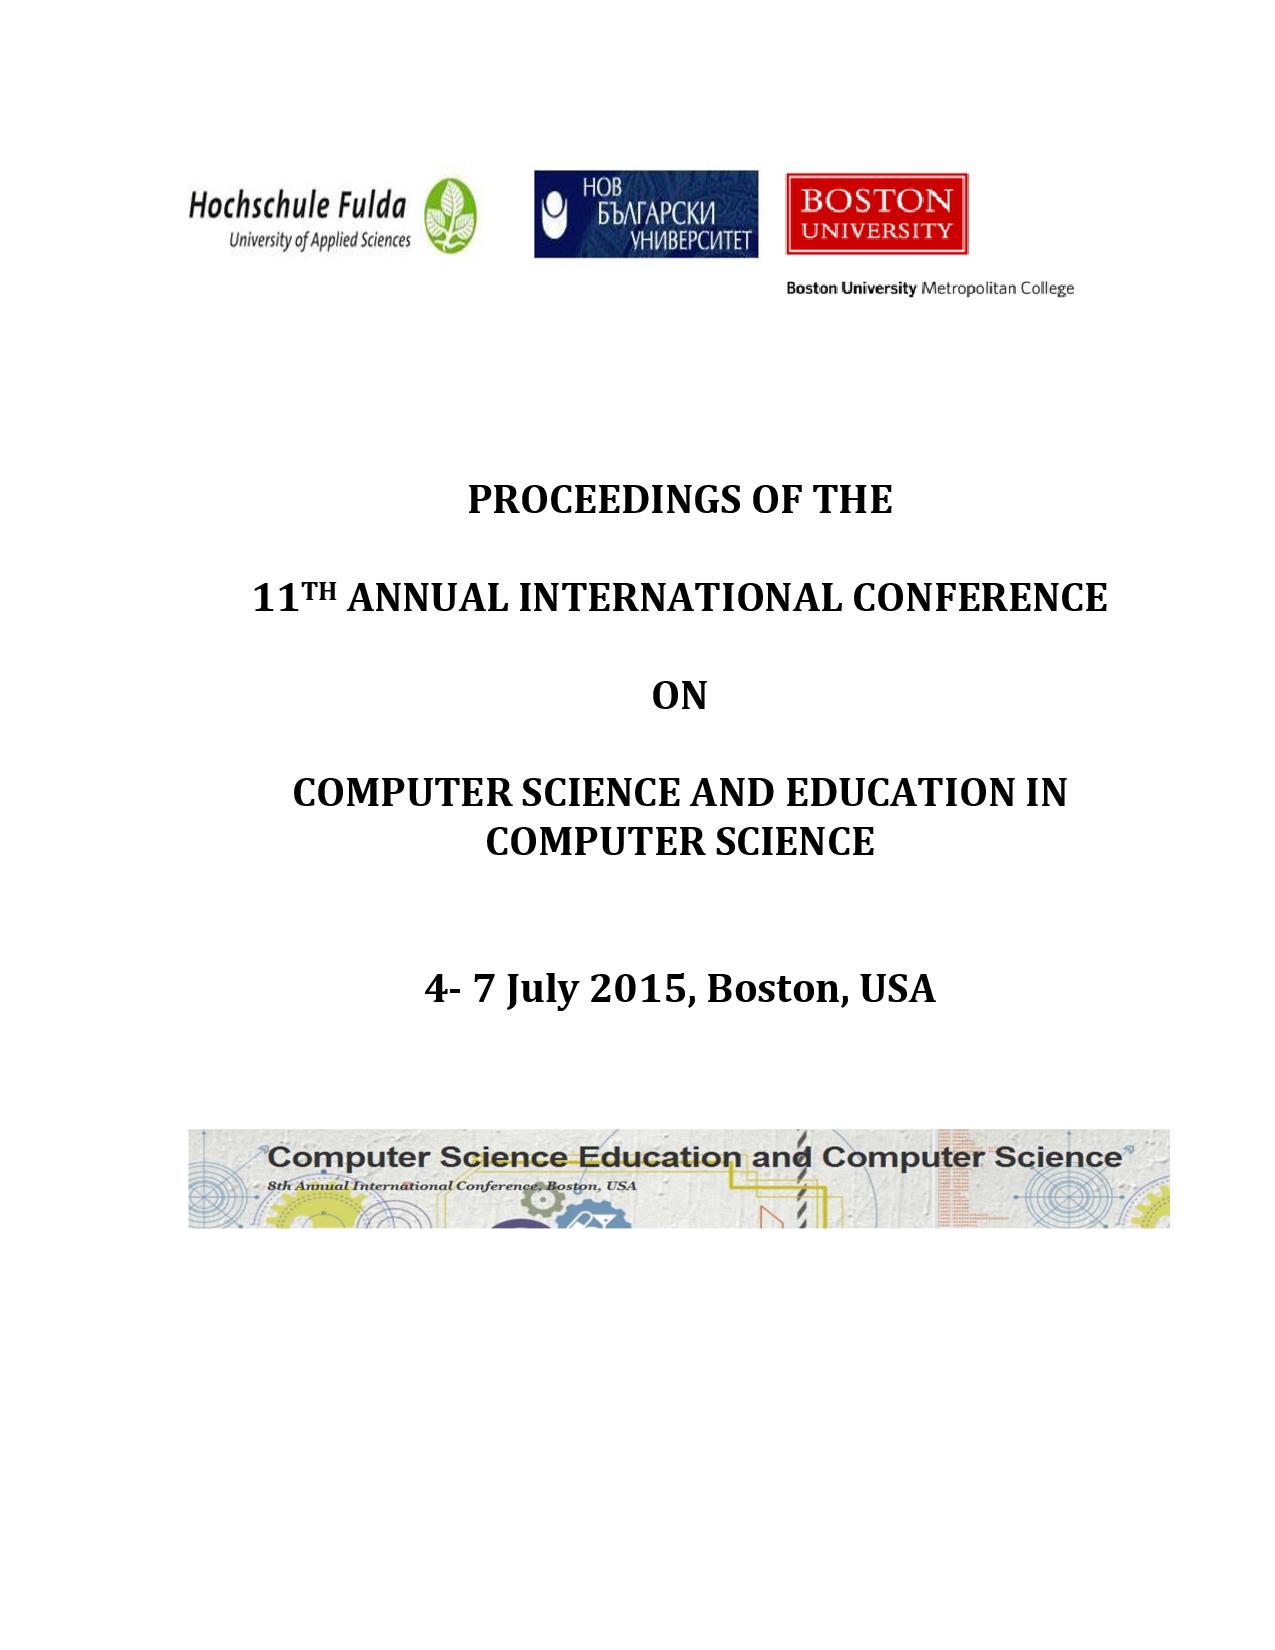 One Approach in Computer Science Education towards Economy Cover Image